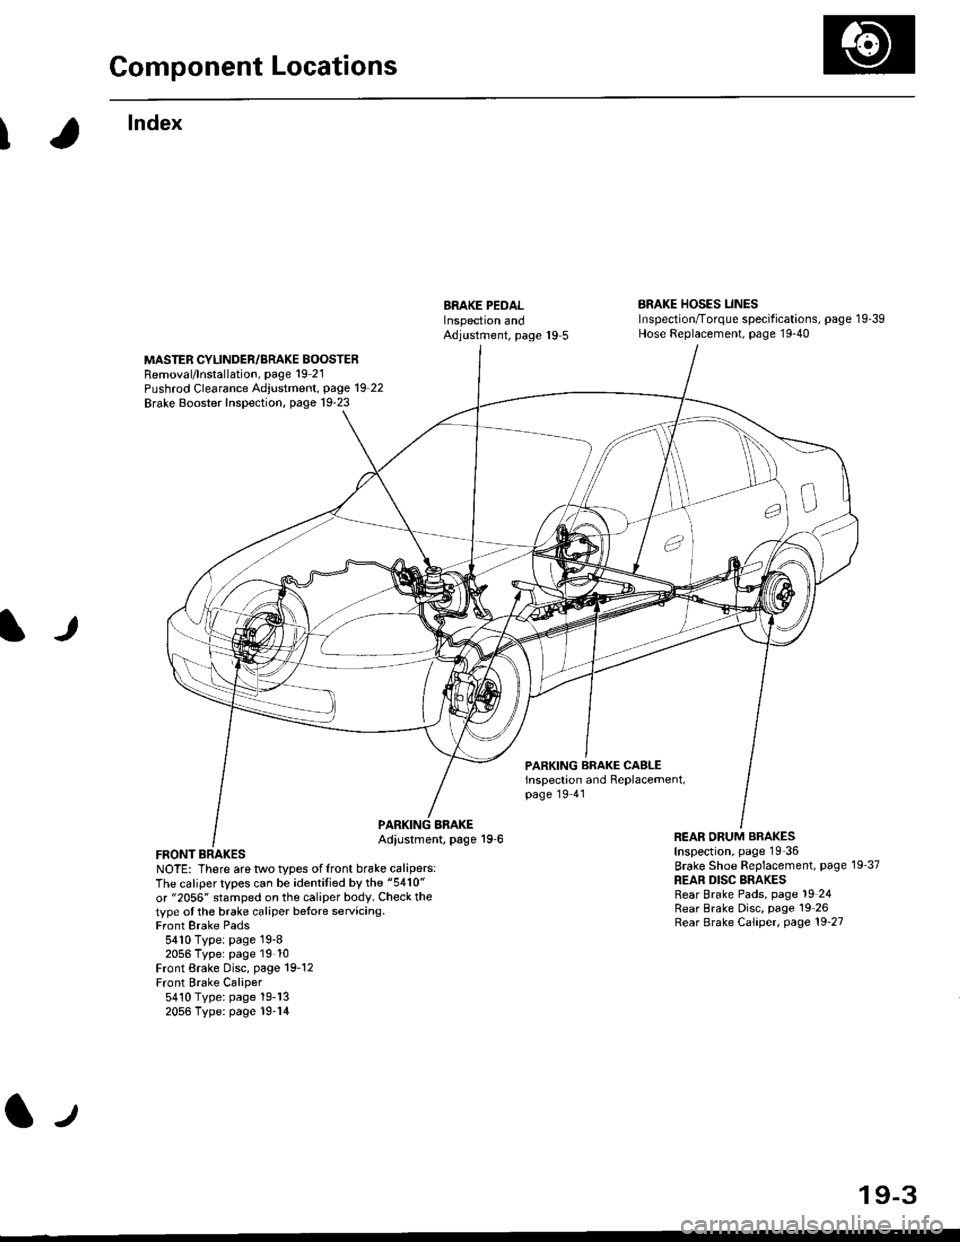 HONDA CIVIC 2000 6.G Workshop Manual Component Locations
I
lndex
ERAKE PEDALInspectron andAdjustment, page 19 5
BRAKE HOSES LINESInspection/Torque specif ications, page 1 9-39Hose Replacement, page 19-40
MASTER CYLINDER/BRAKE BOOSTERRemo